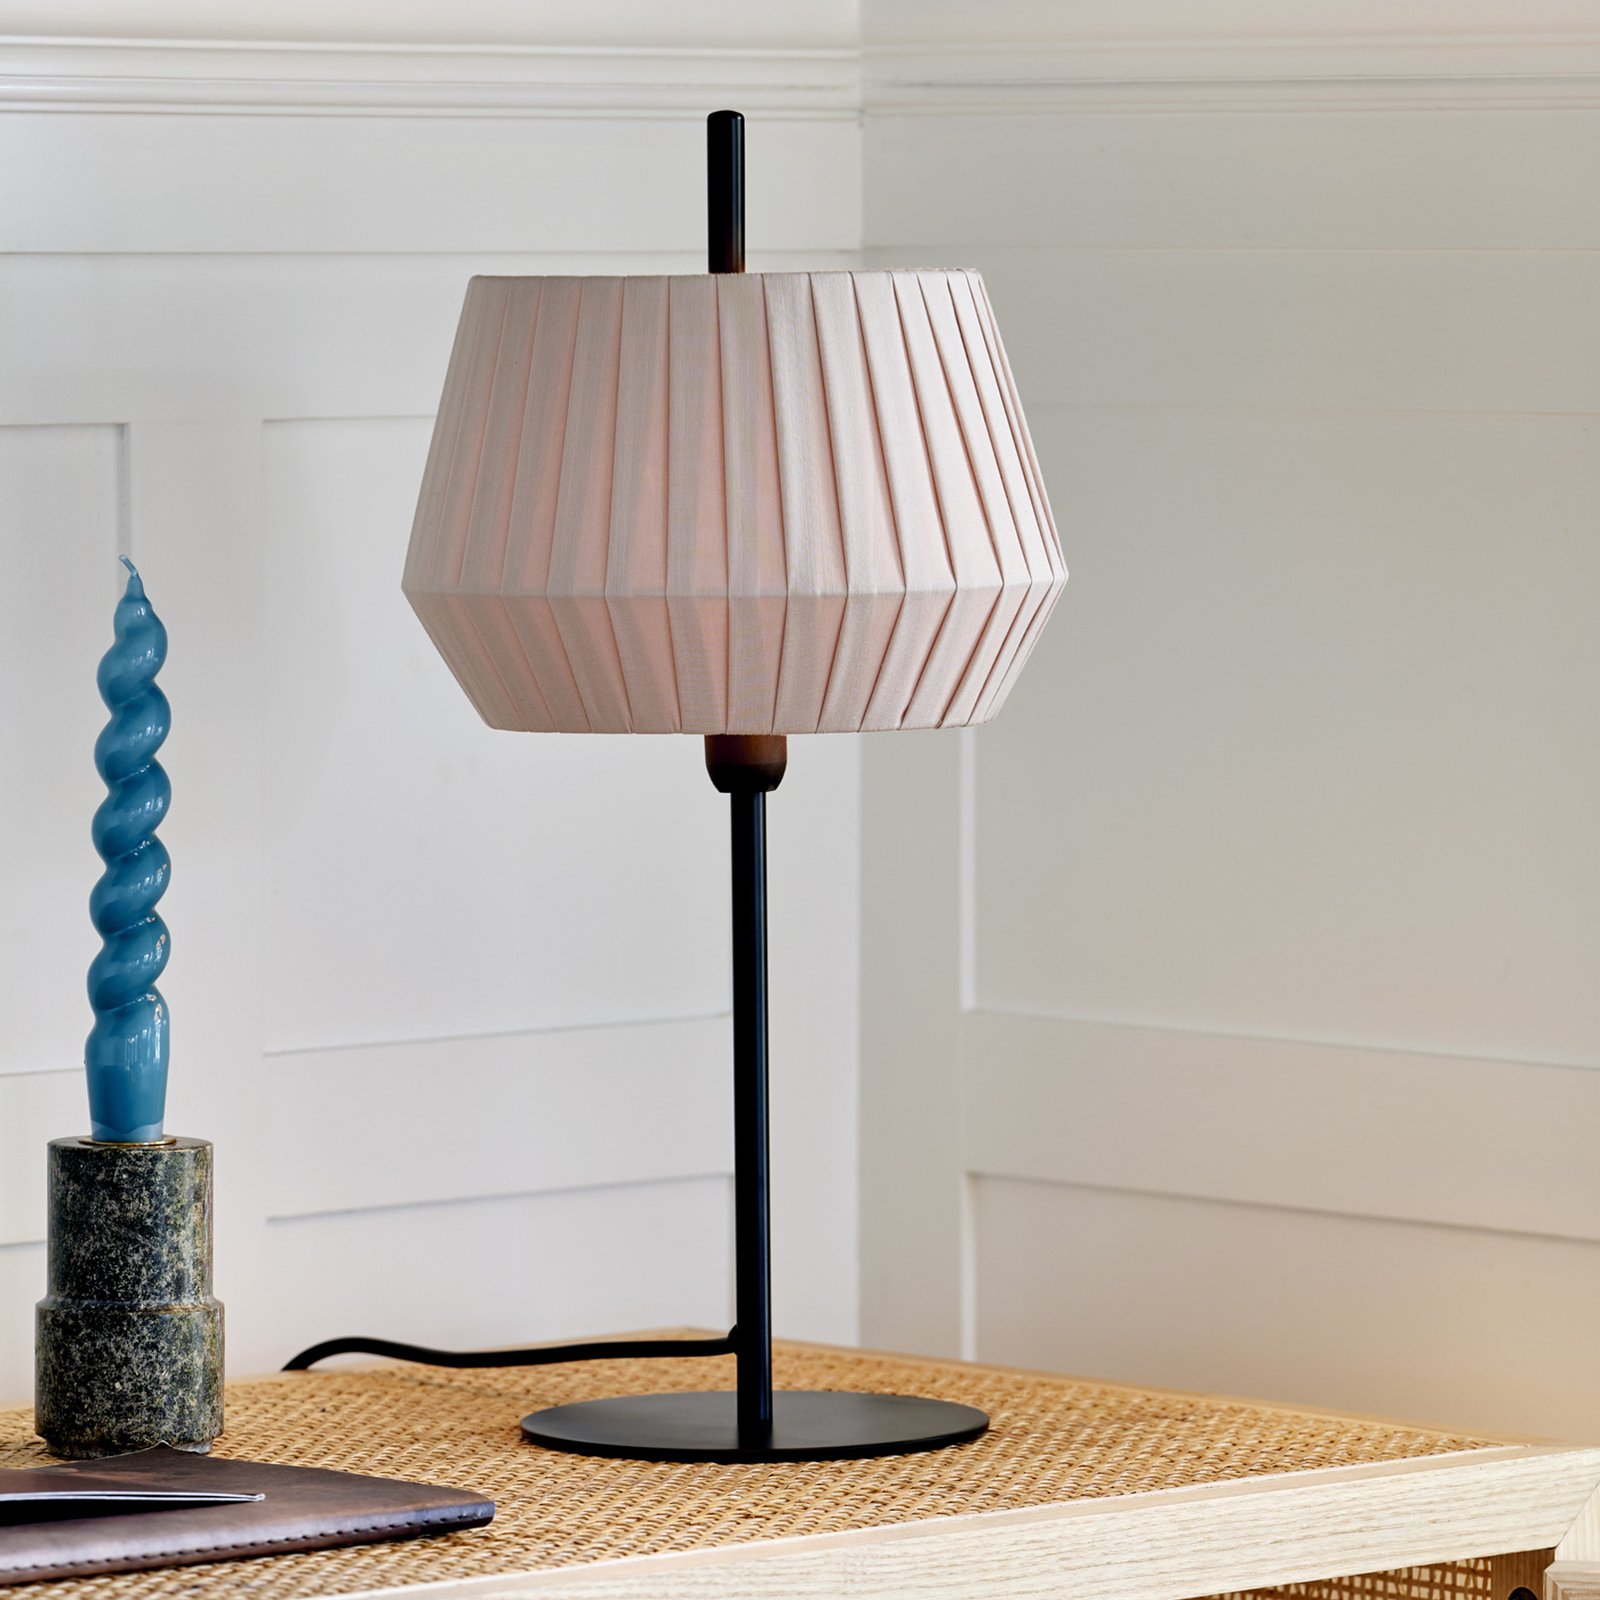 Dicte table lamp, hand bound lampshade, amber